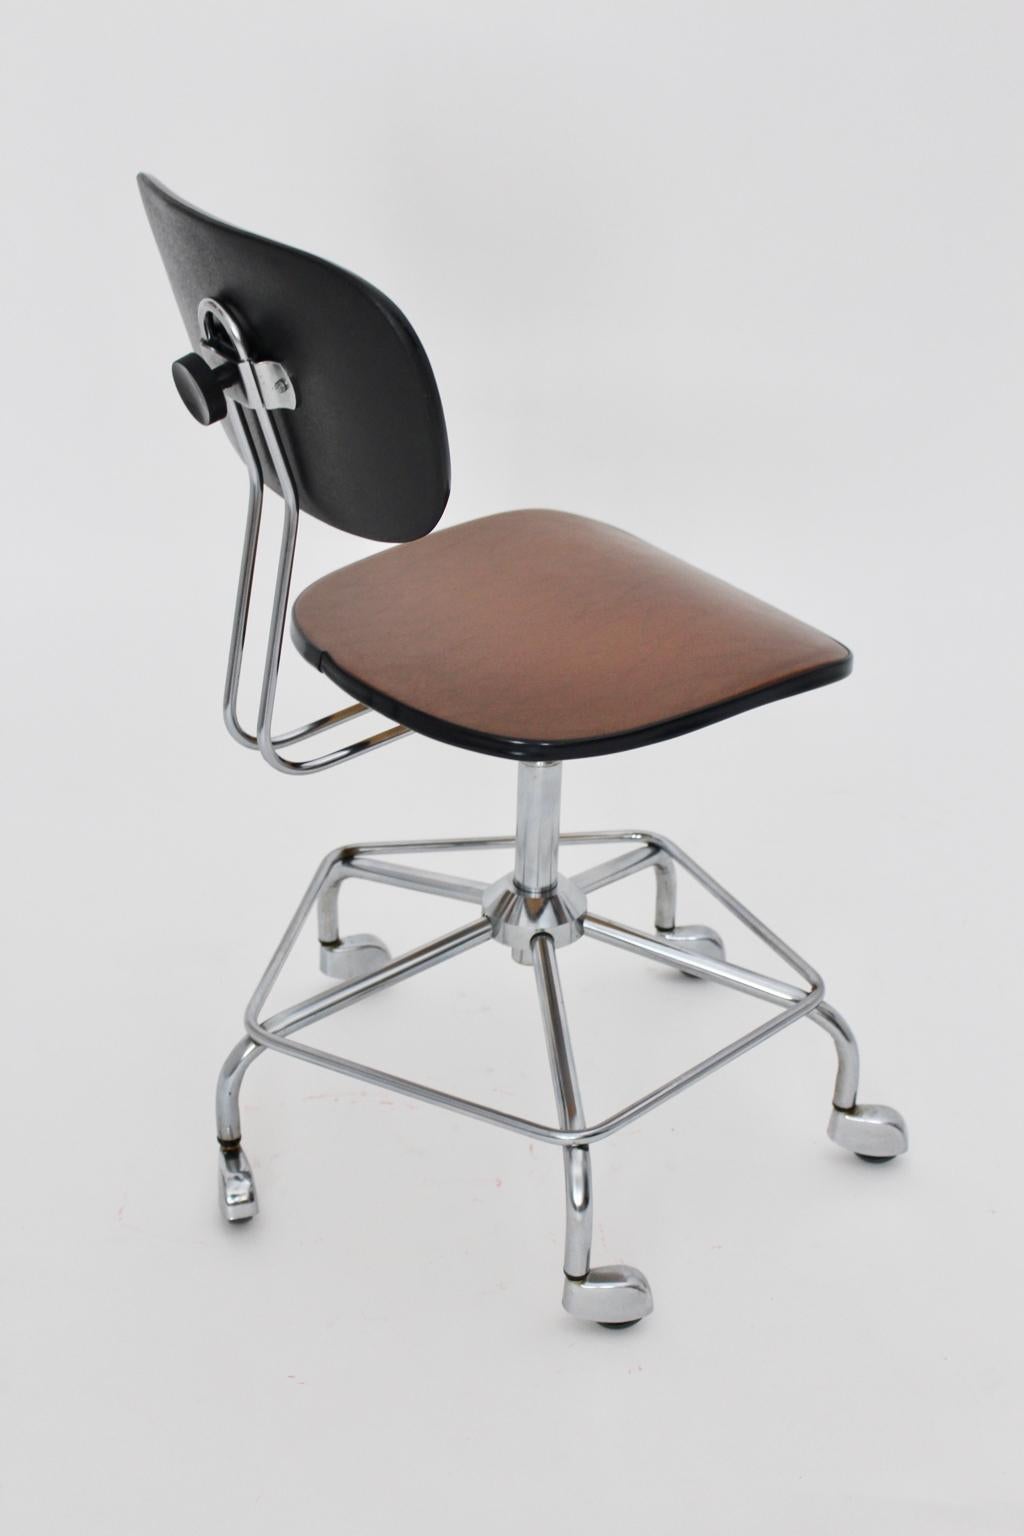 Mid-Century Modern Vintage Desk Chair Attributed to Egon Eiermann, 1950, Germany For Sale 4